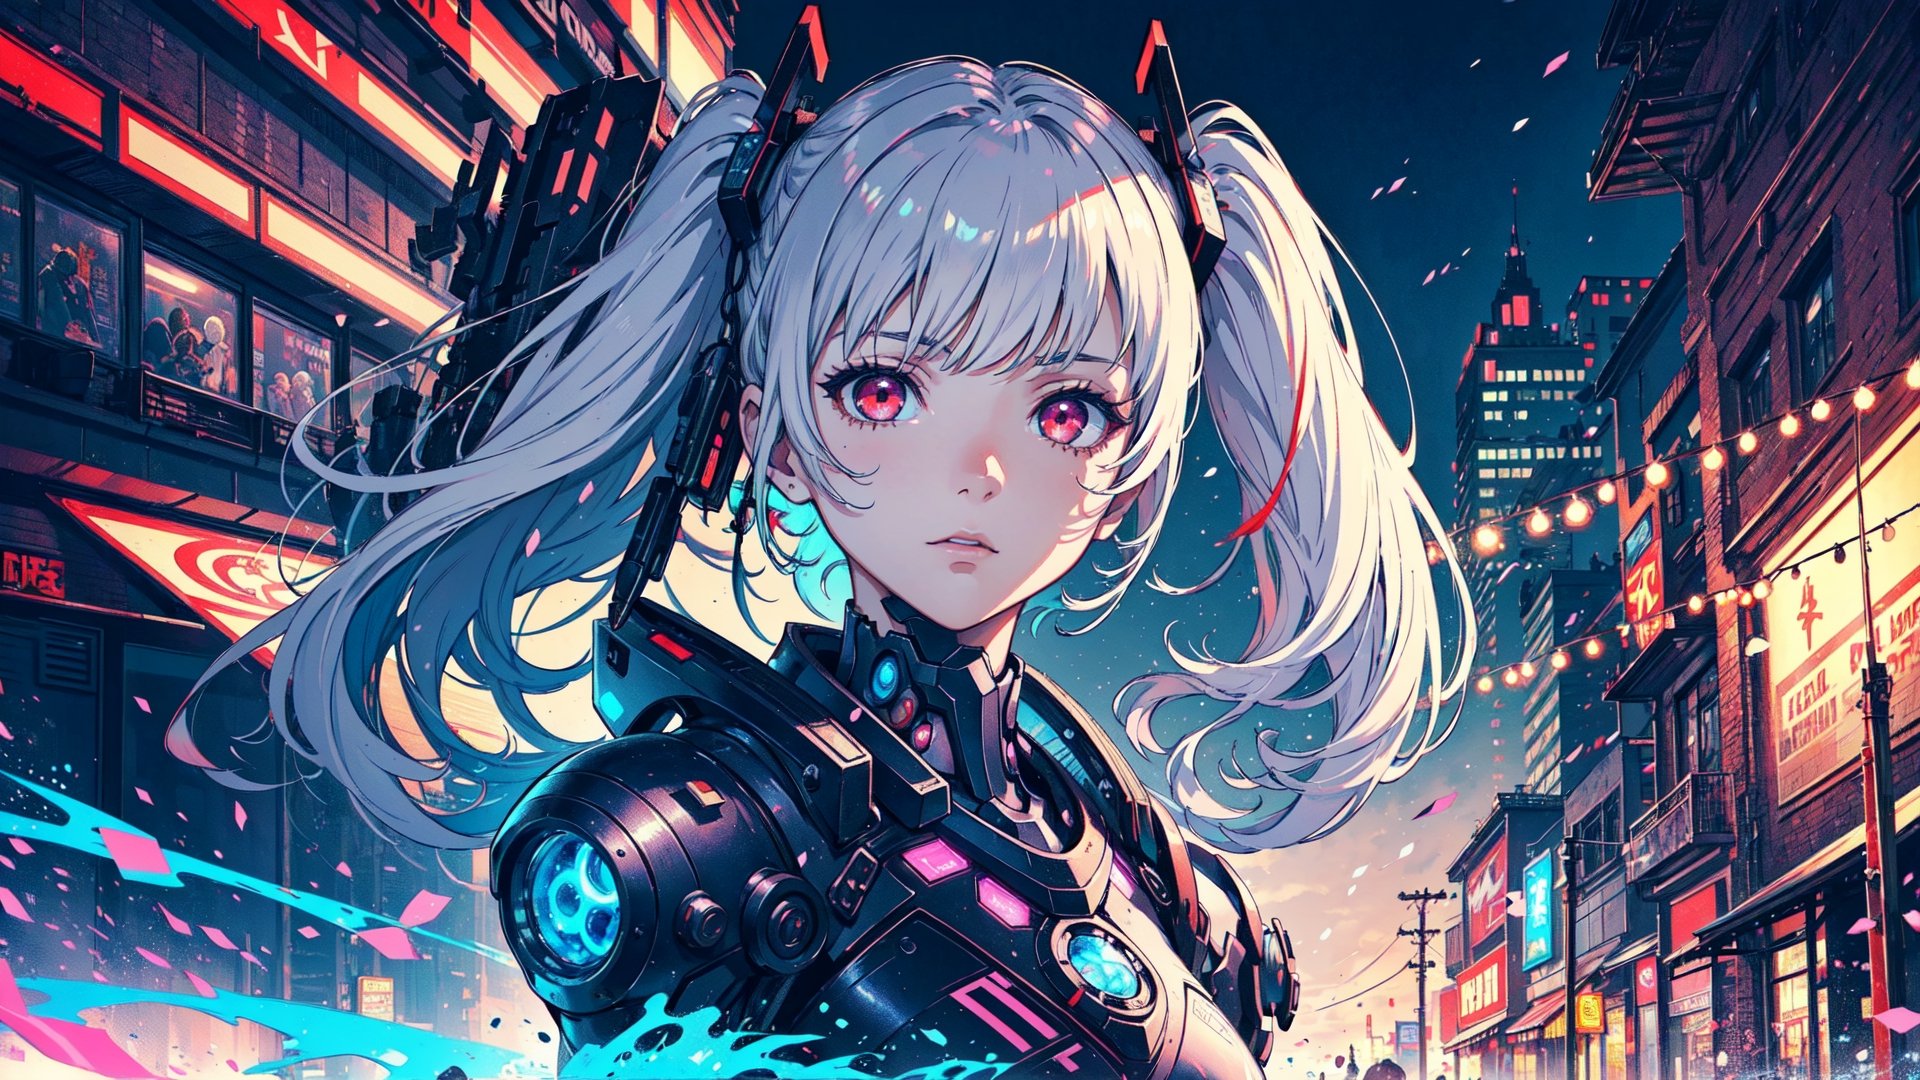 masterpiece, best quality, illustration, 1girl, beautiful detailed eyes,colorful background,mechanical prosthesis,mecha coverage,emerging dark purple across with white hair,pig tails,disheveled hair,fluorescent purple,cool movement,rose red eyes,beatiful detailed cyberpunk city,multicolored hair,beautiful detailed glow,1 girl, expressionless,cold expression,insanity, long bangs,long hair, lace,dynamic composition, motion, ultra - detailed, incredibly detailed, a lot of details, amazing fine details and brush strokes, smooth, hd semirealistic anime cg concept art digital painting,Realism,Portrait,